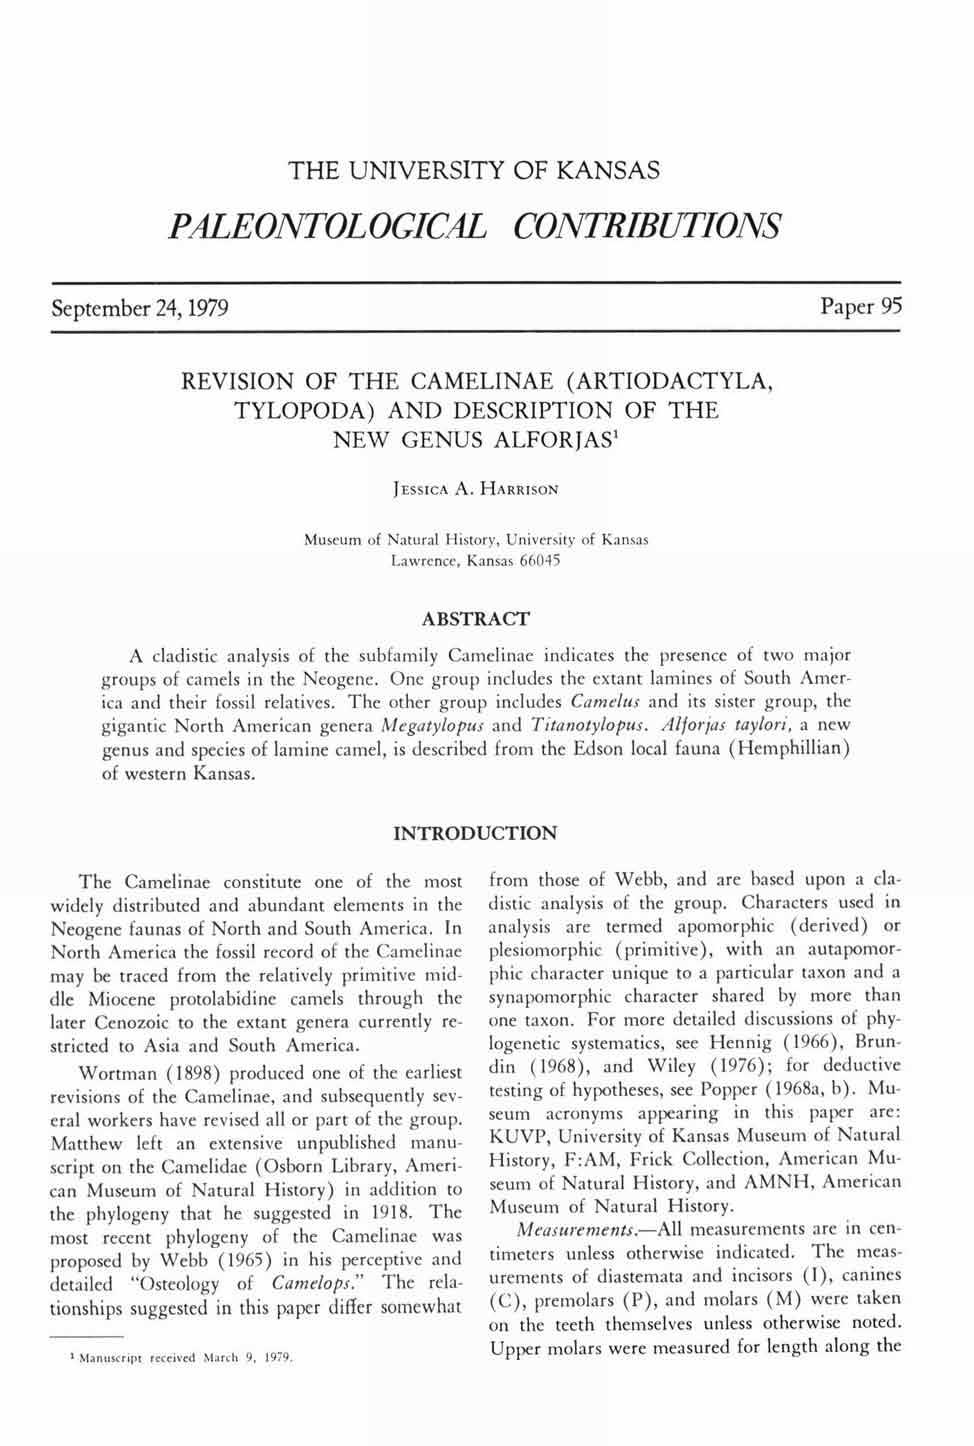 THE UNIVERSITY OF KANSAS PALEONTOLOGICAL CONTRIBUTIONS September 24, 1979 Paper 95 REVISION OF THE CAMELINAE (ARTIODACTYLA, TYLOPODA) AND DESCRIPTION OF THE NEW GENUS ALFORJAS 1 JESSICA A.